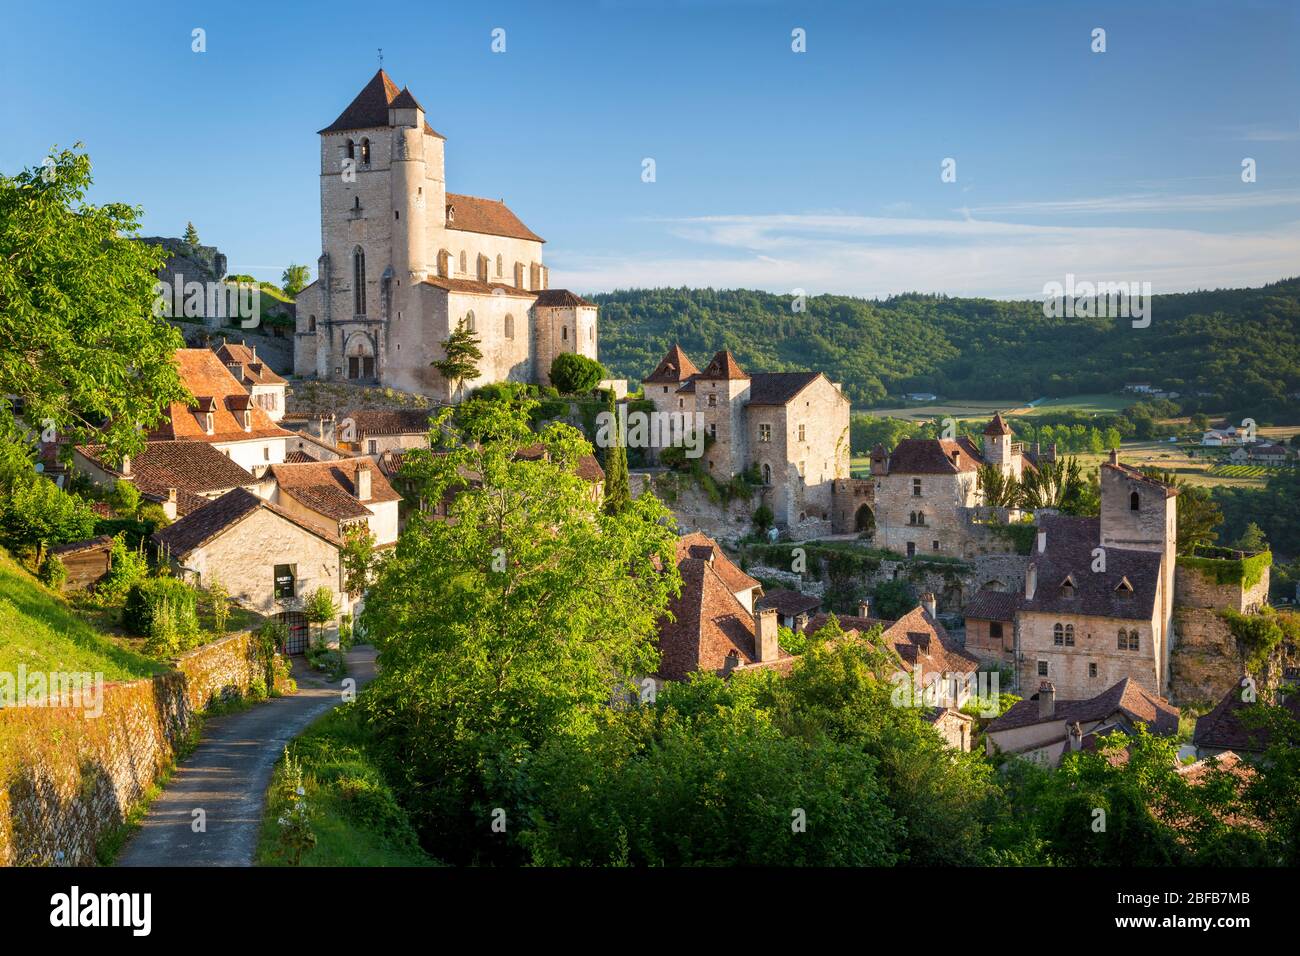 Early morning over Saint-Cirq-Lapopie, Lot Valley, Midi-Pyrenees, France Stock Photo